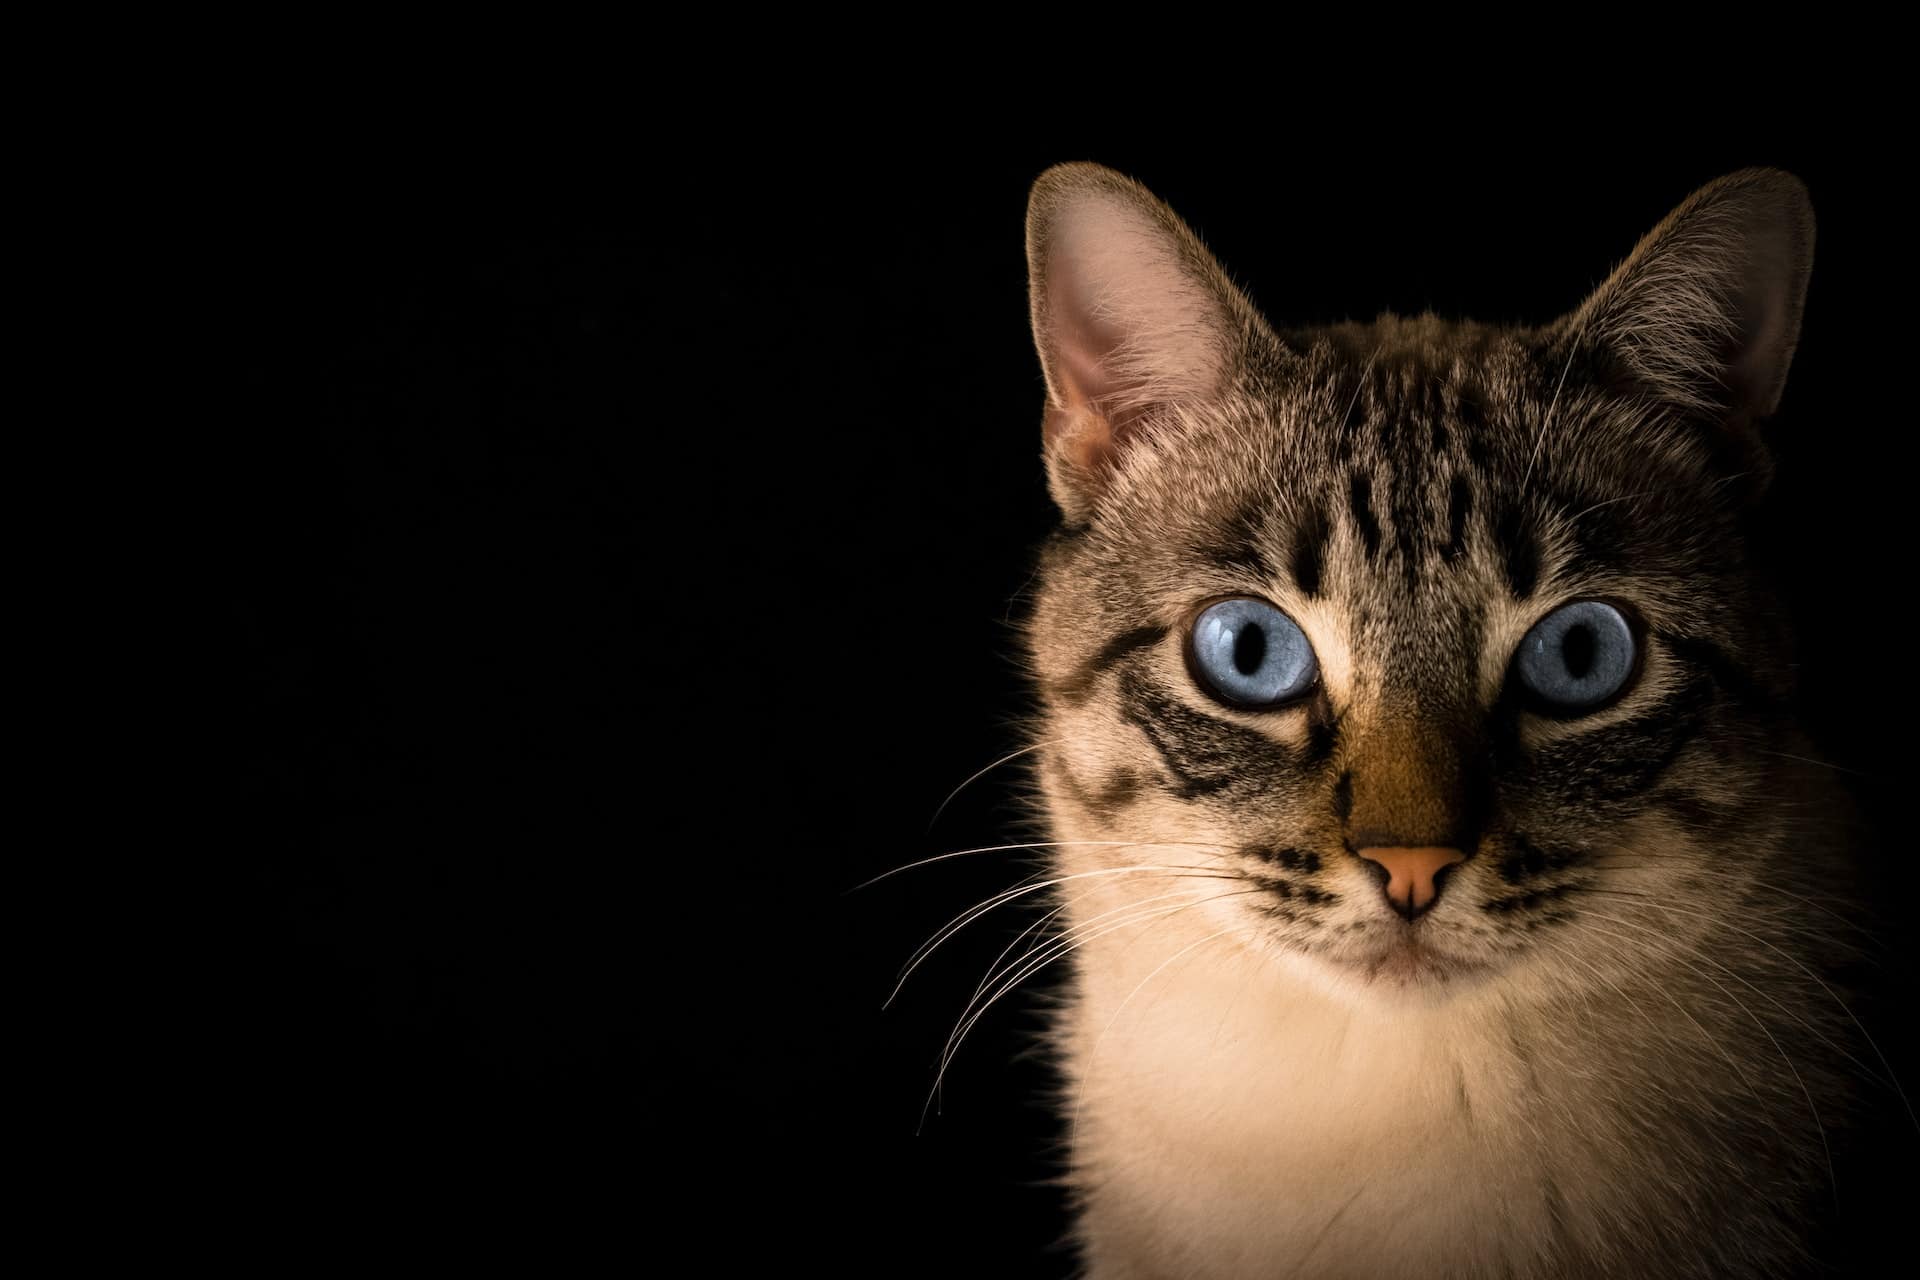 stock photo of a tabby cat with beautiful blue eyes against a solid black background